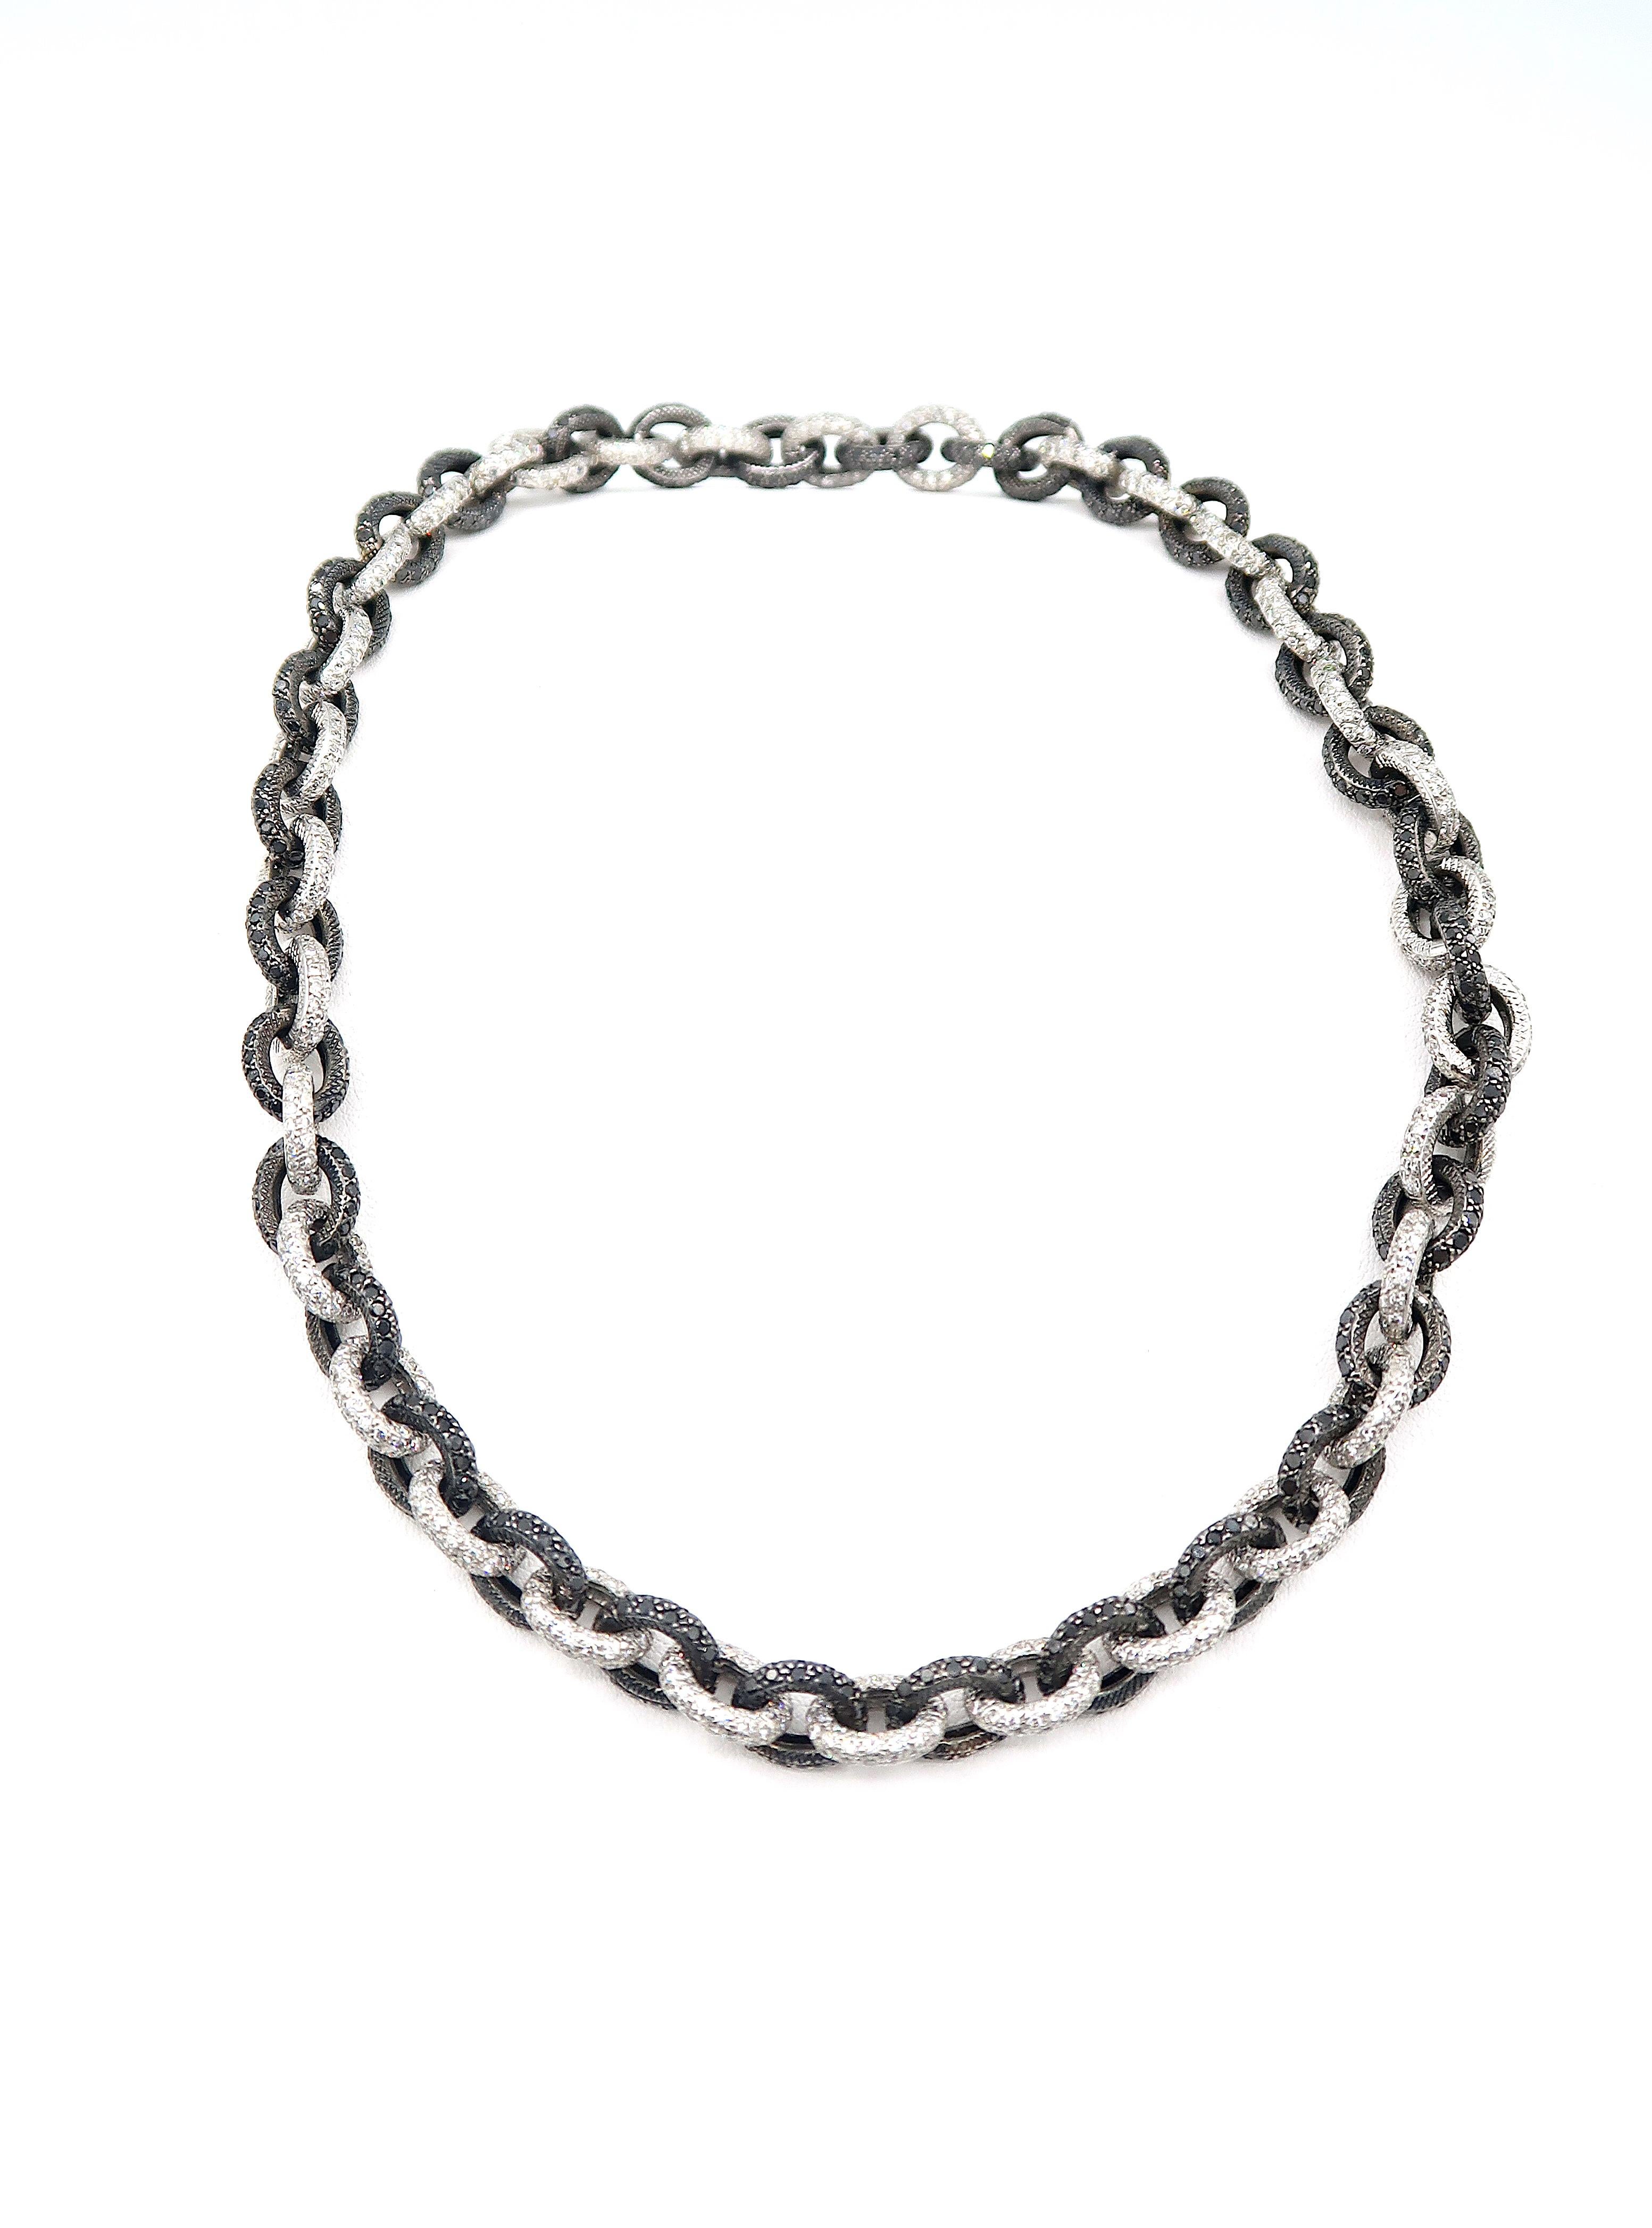 BOON Black and White Diamond Pavé Link Chain Bracelet and Chain Necklace in 18K White Gold

BOON Black and White Diamond Pavé Link Chain Bracelet in 18K White Gold
Length: 7.25 inches
White Diamond: 5.25 ct
Black Diamond: 5.69 ct
Gold: 18K White